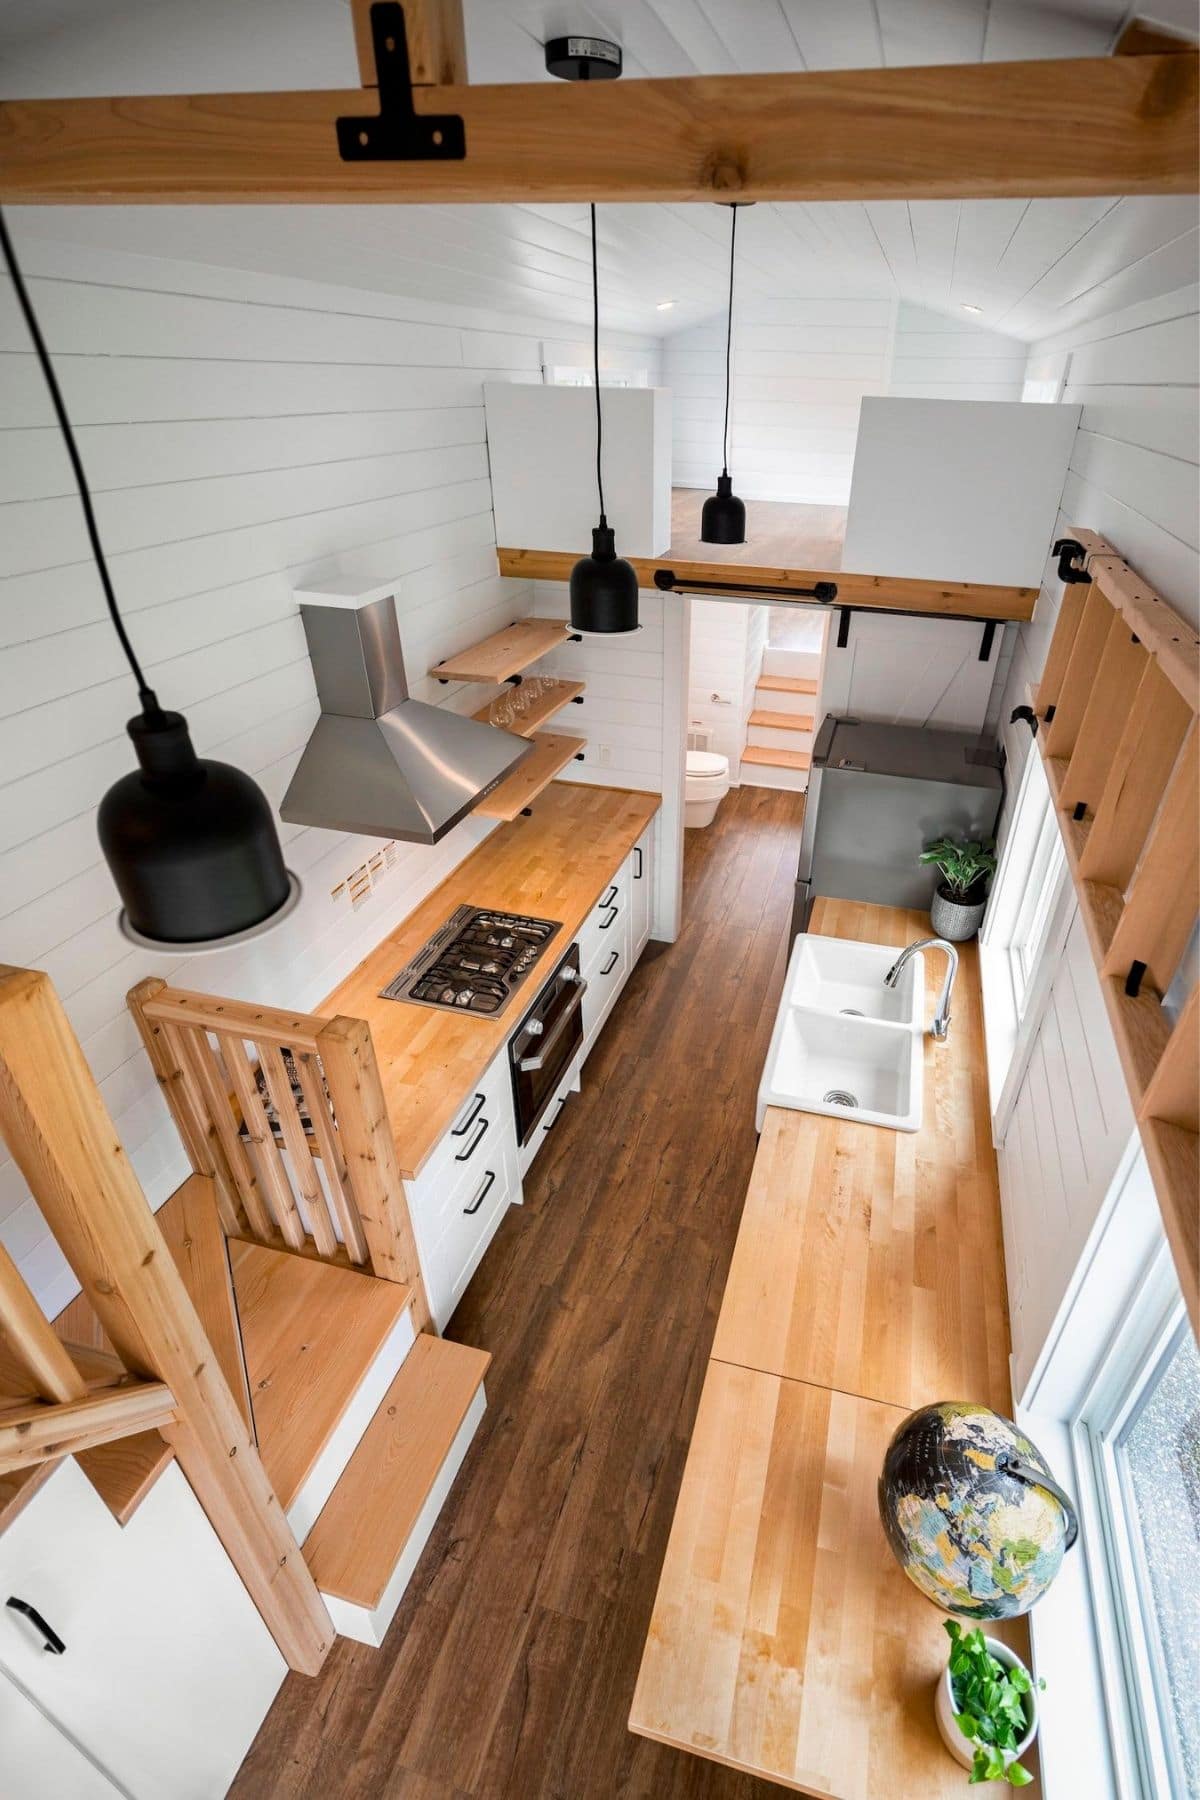 View looking down into tiny kitchen with butcherblock countertops and white cabinetry